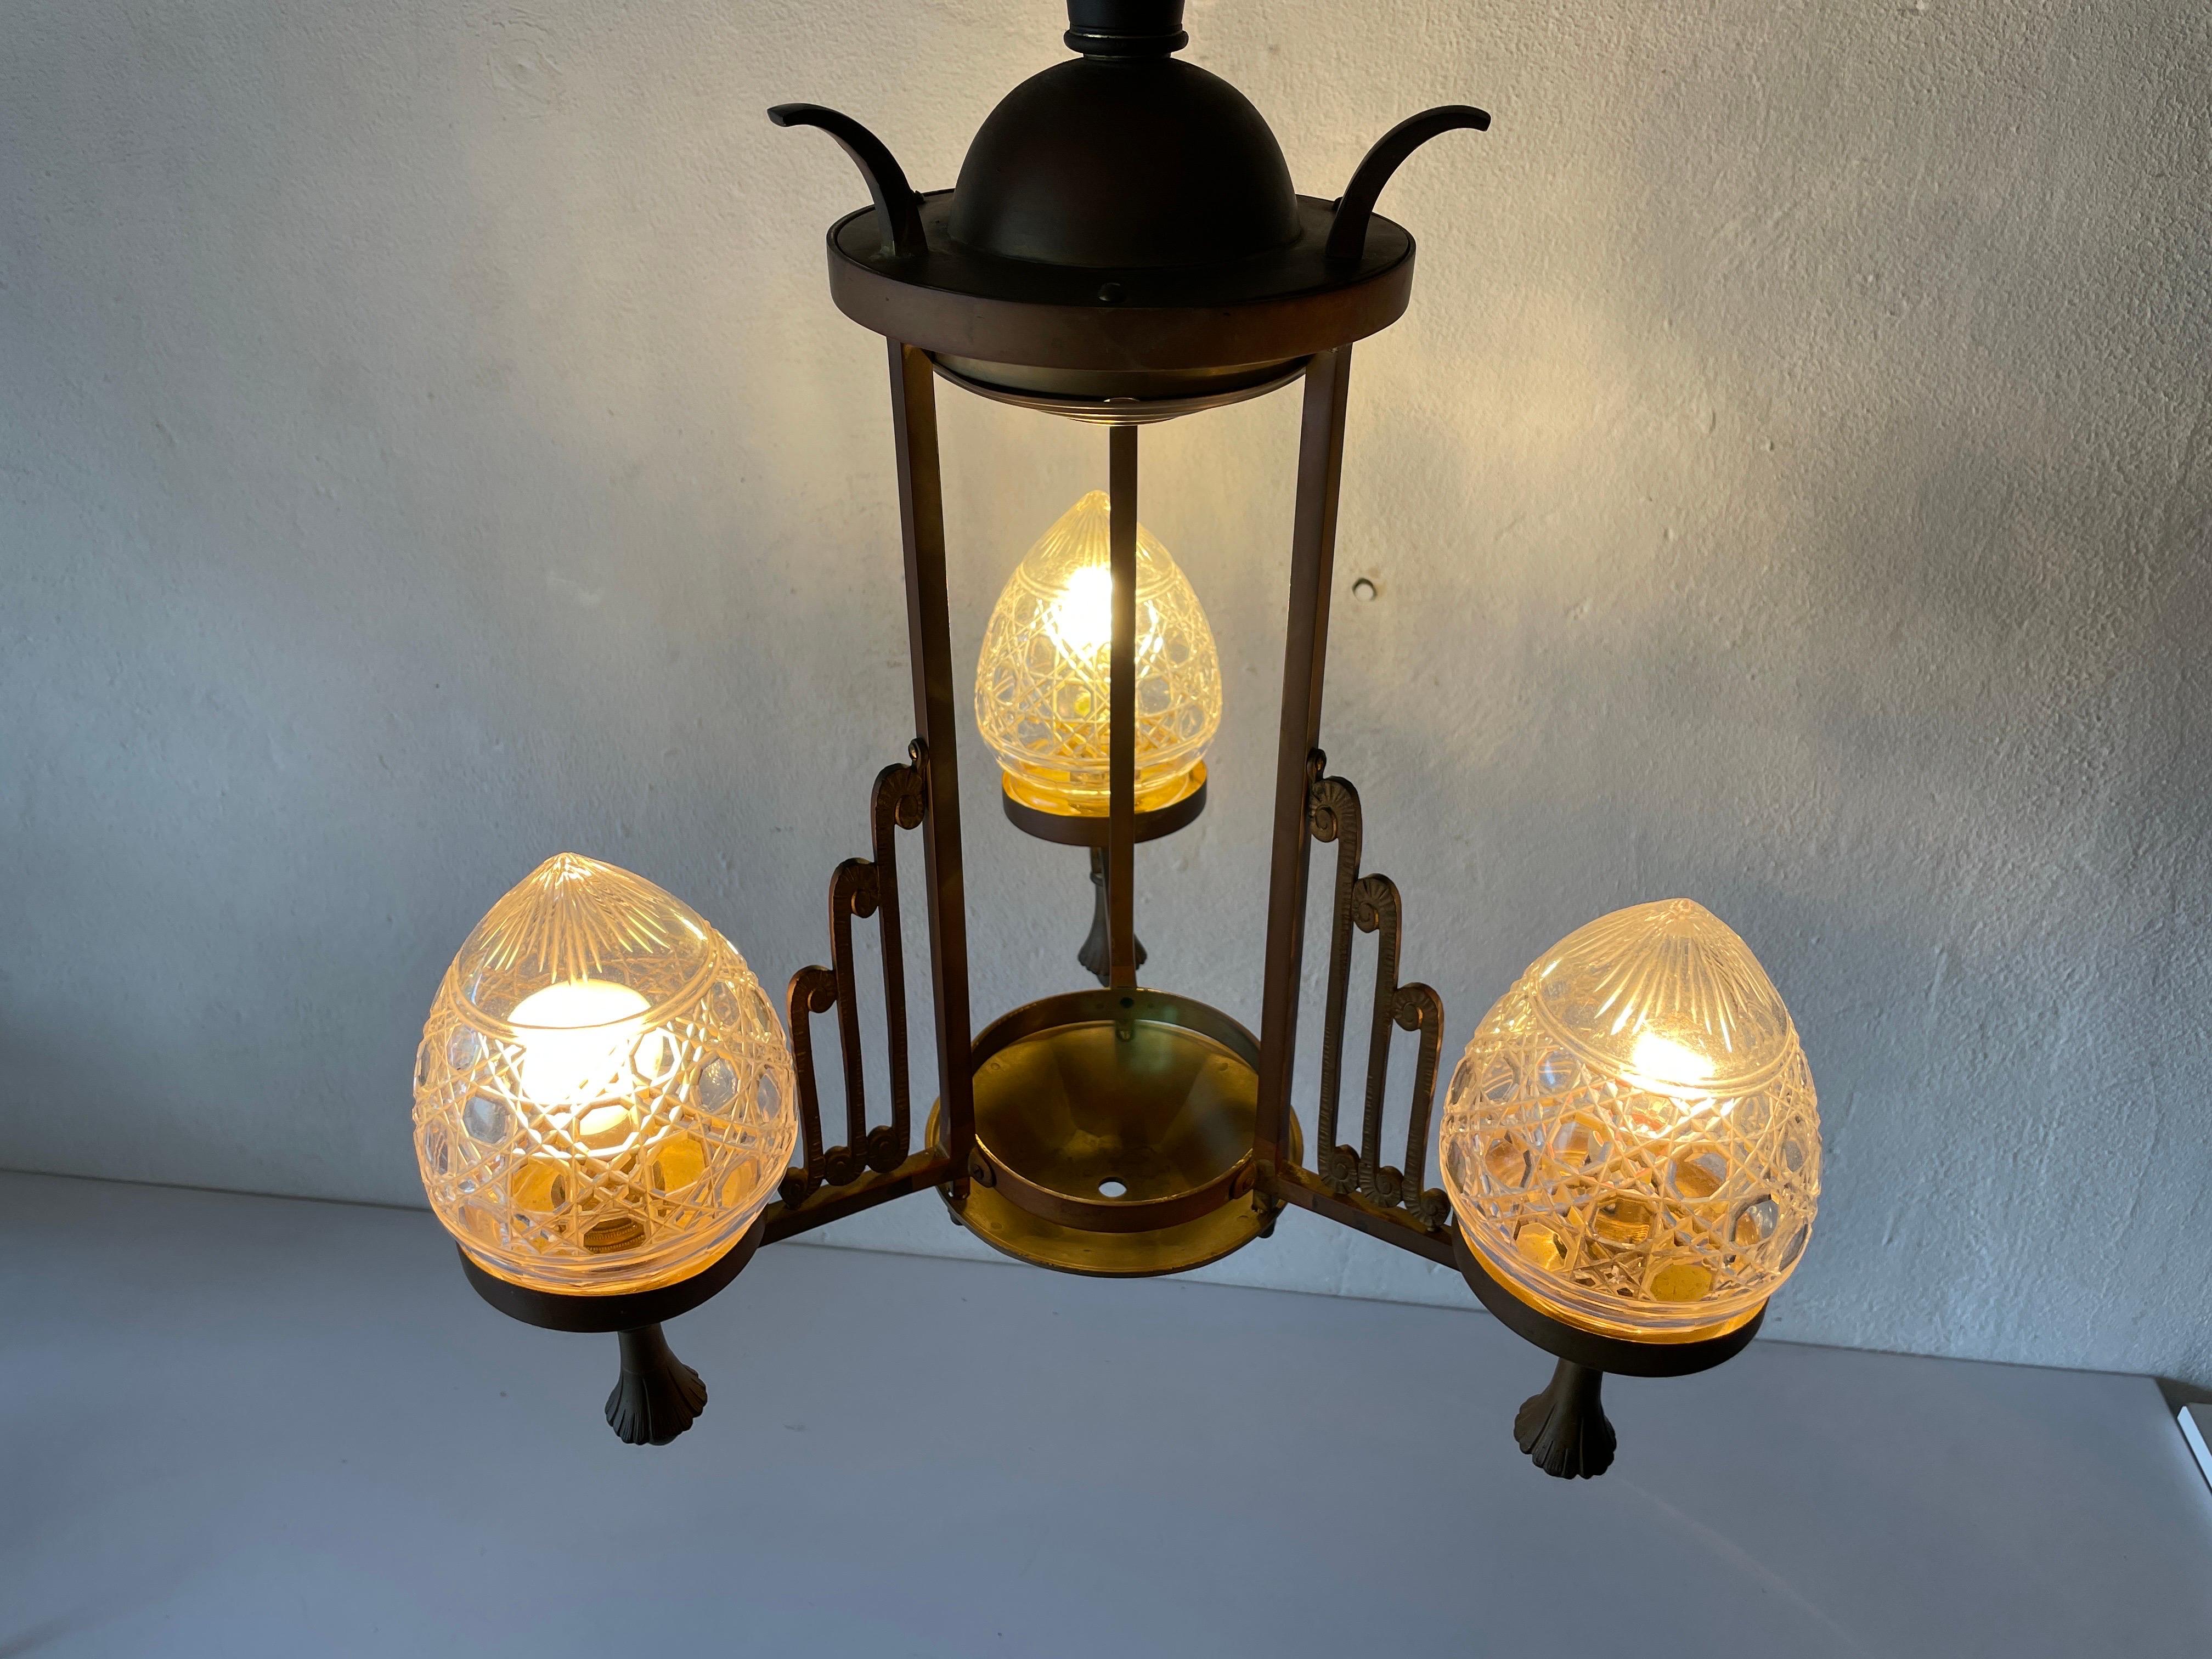 Unique French Copper Architectural Body Chandelier, 1940s, France For Sale 6